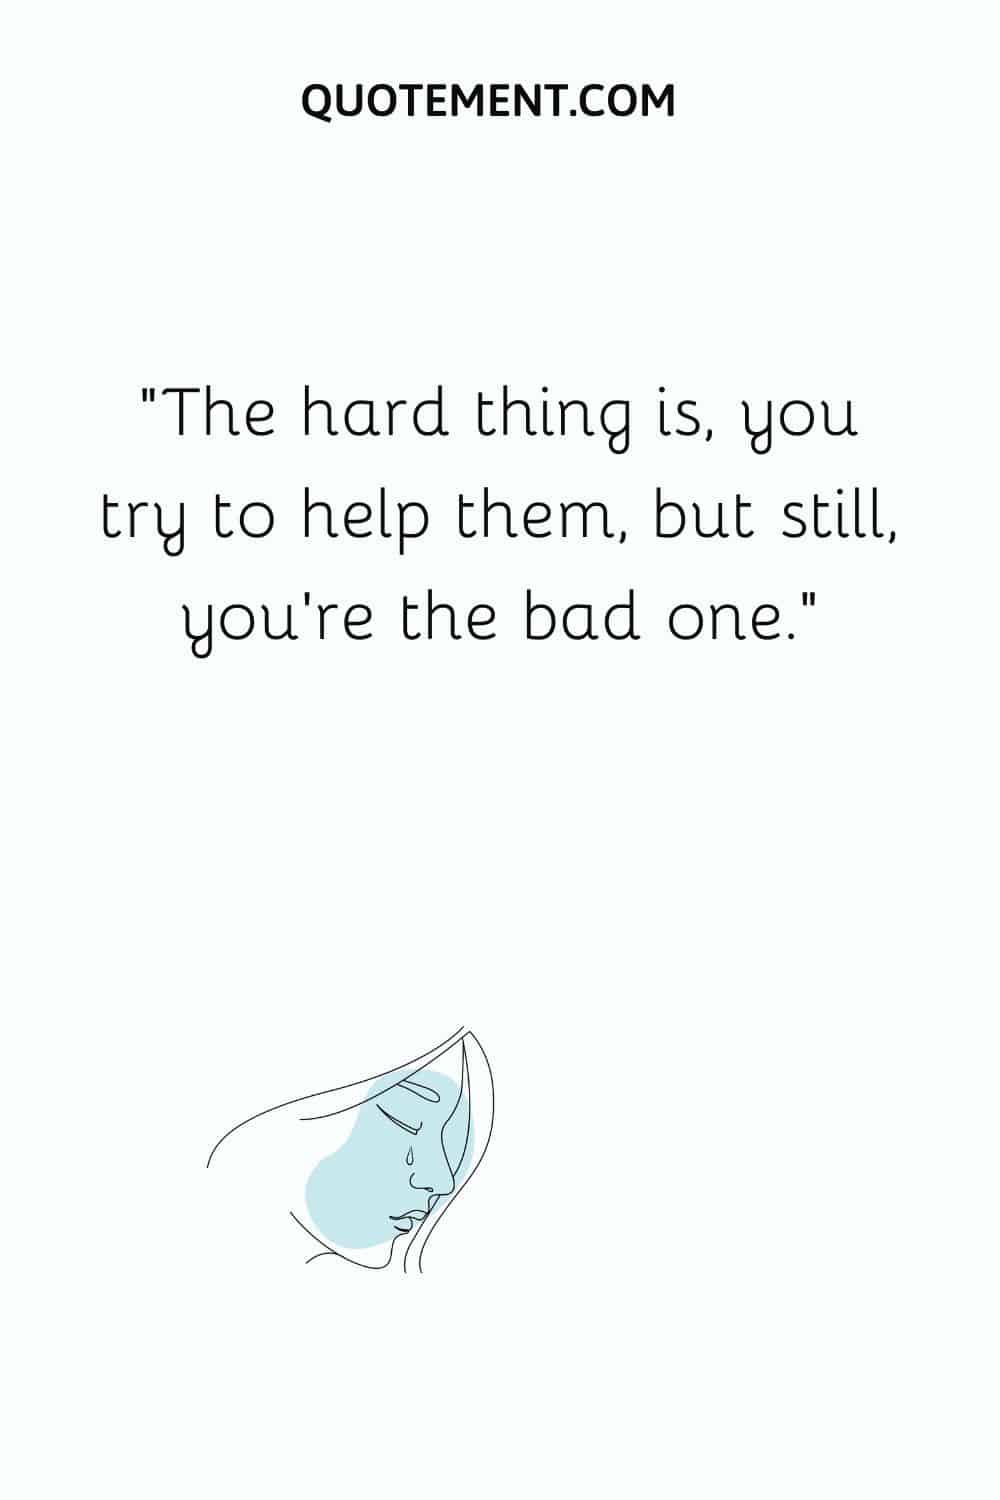 The hard thing is, you try to help them, but still, you’re the bad one